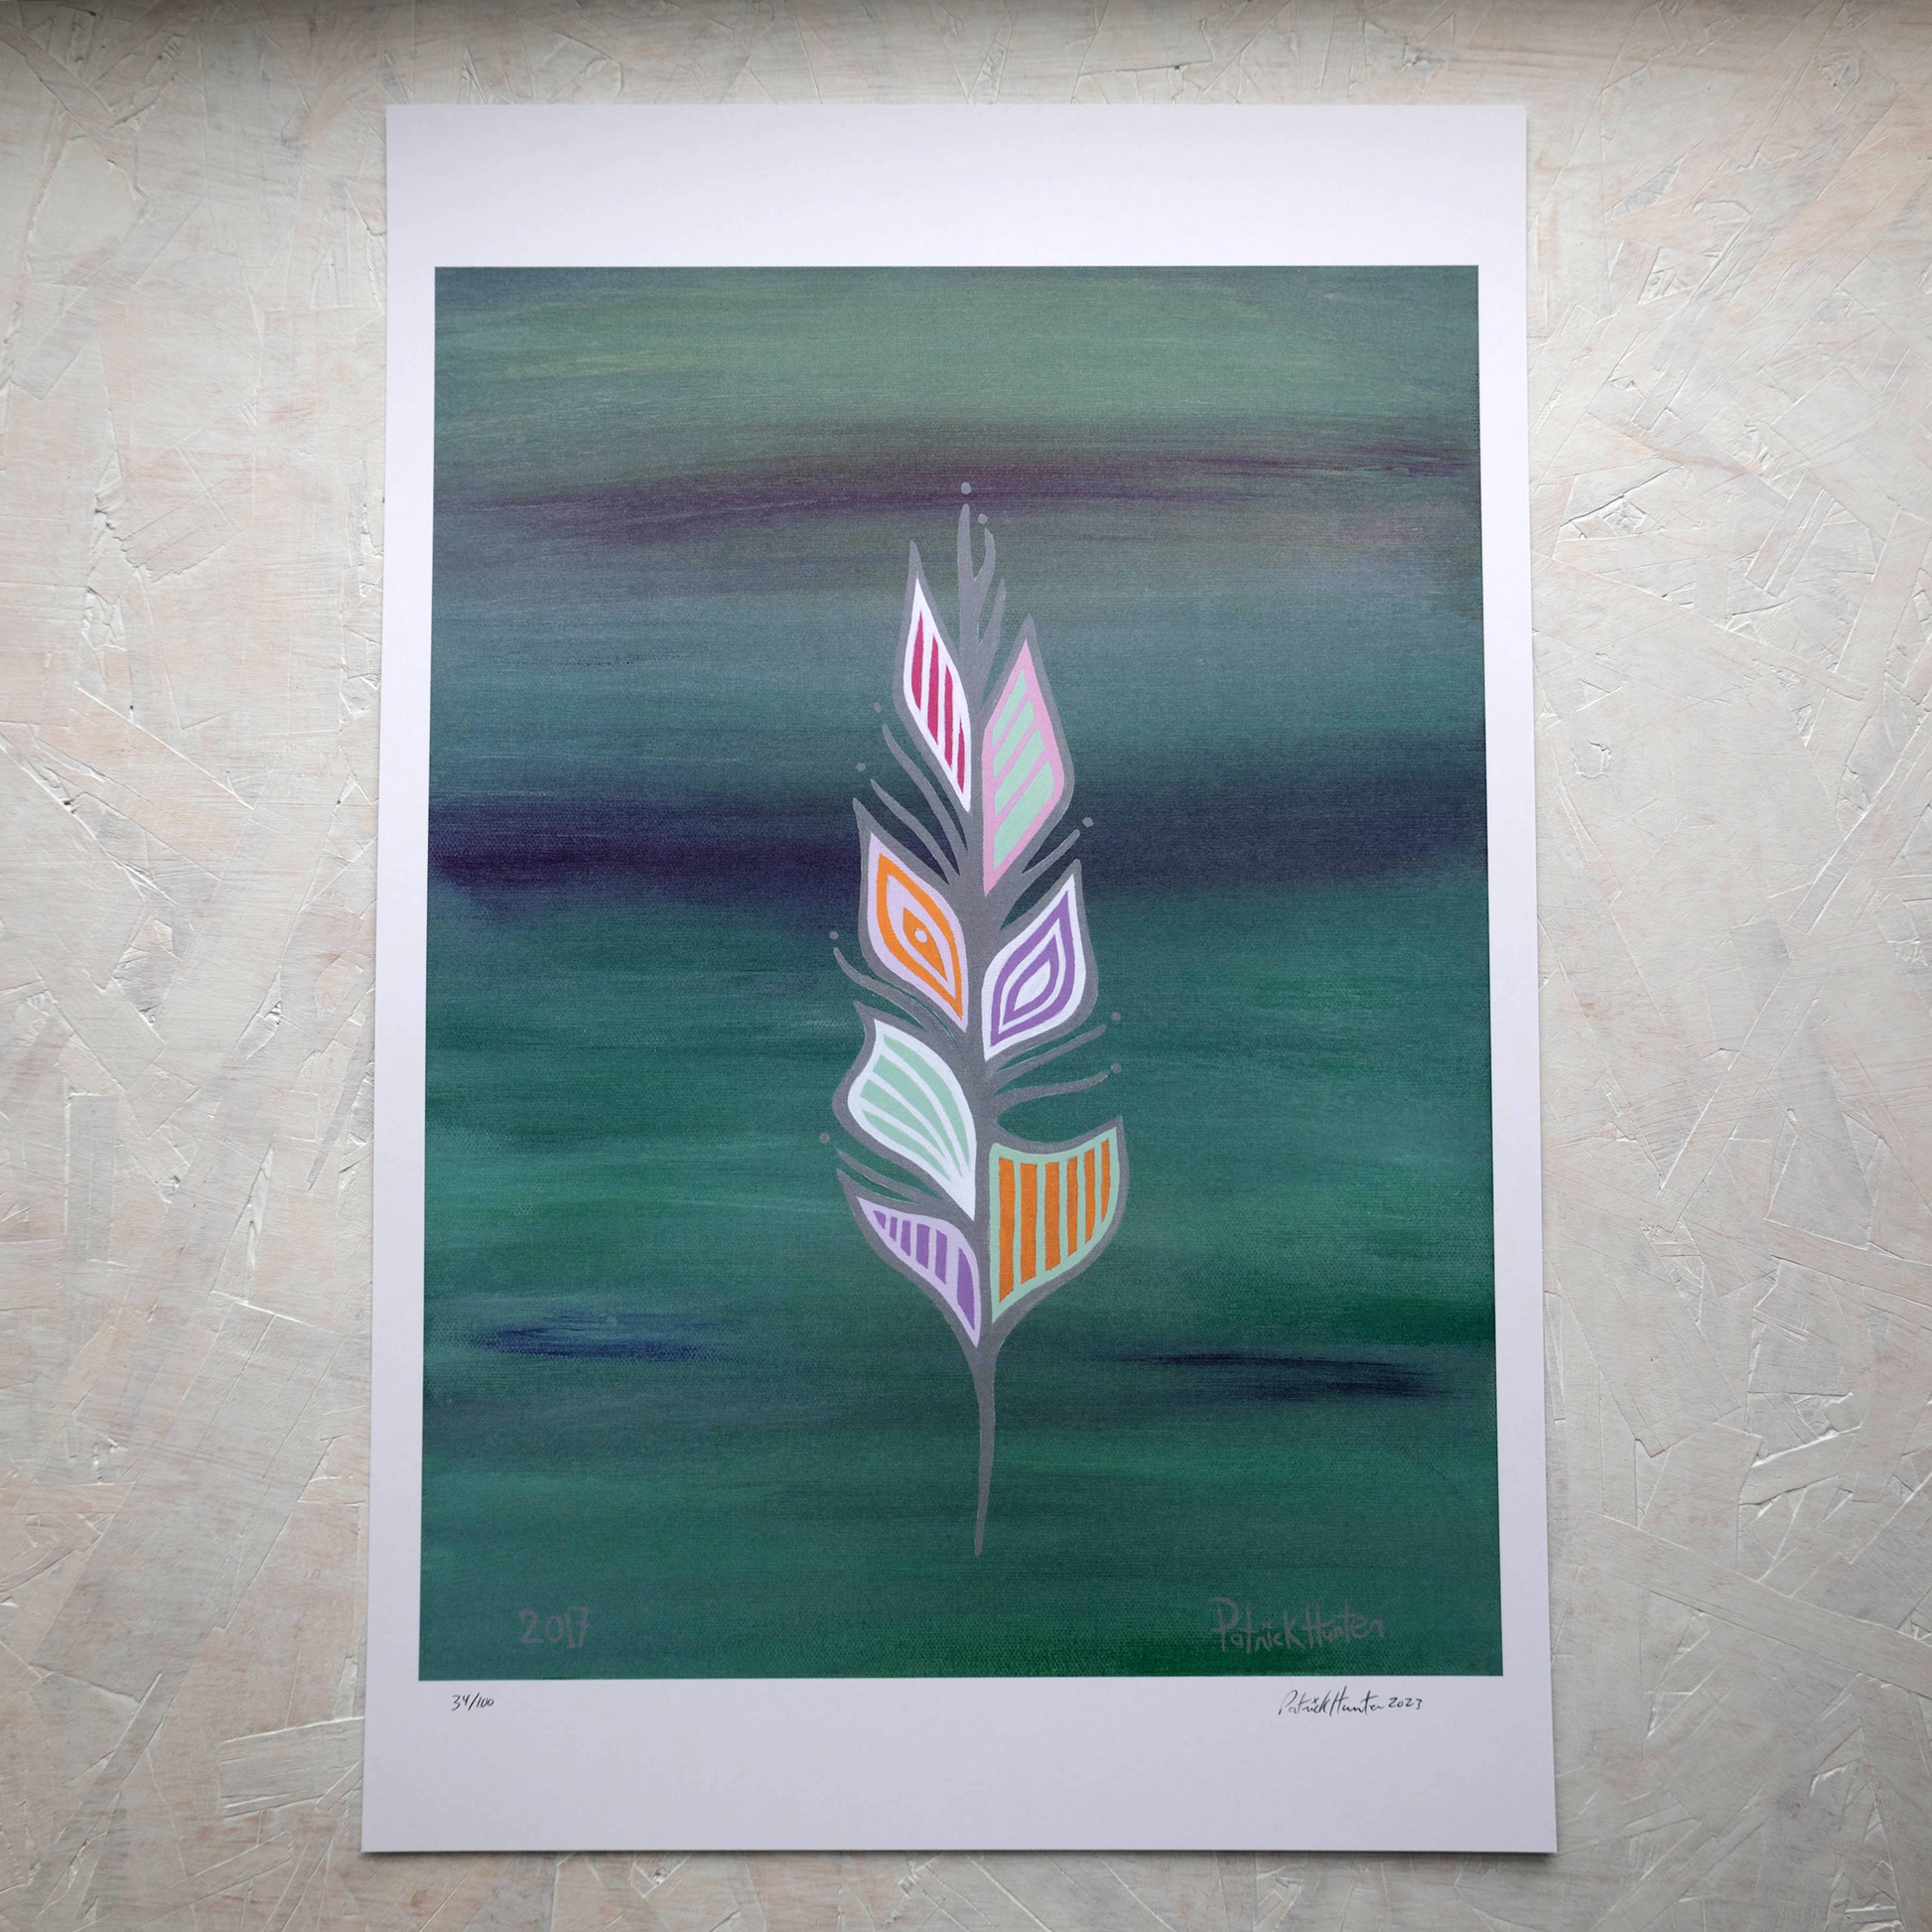 Print of Patrick Hunter's painting of a feather in woodland art style on a varigated background.